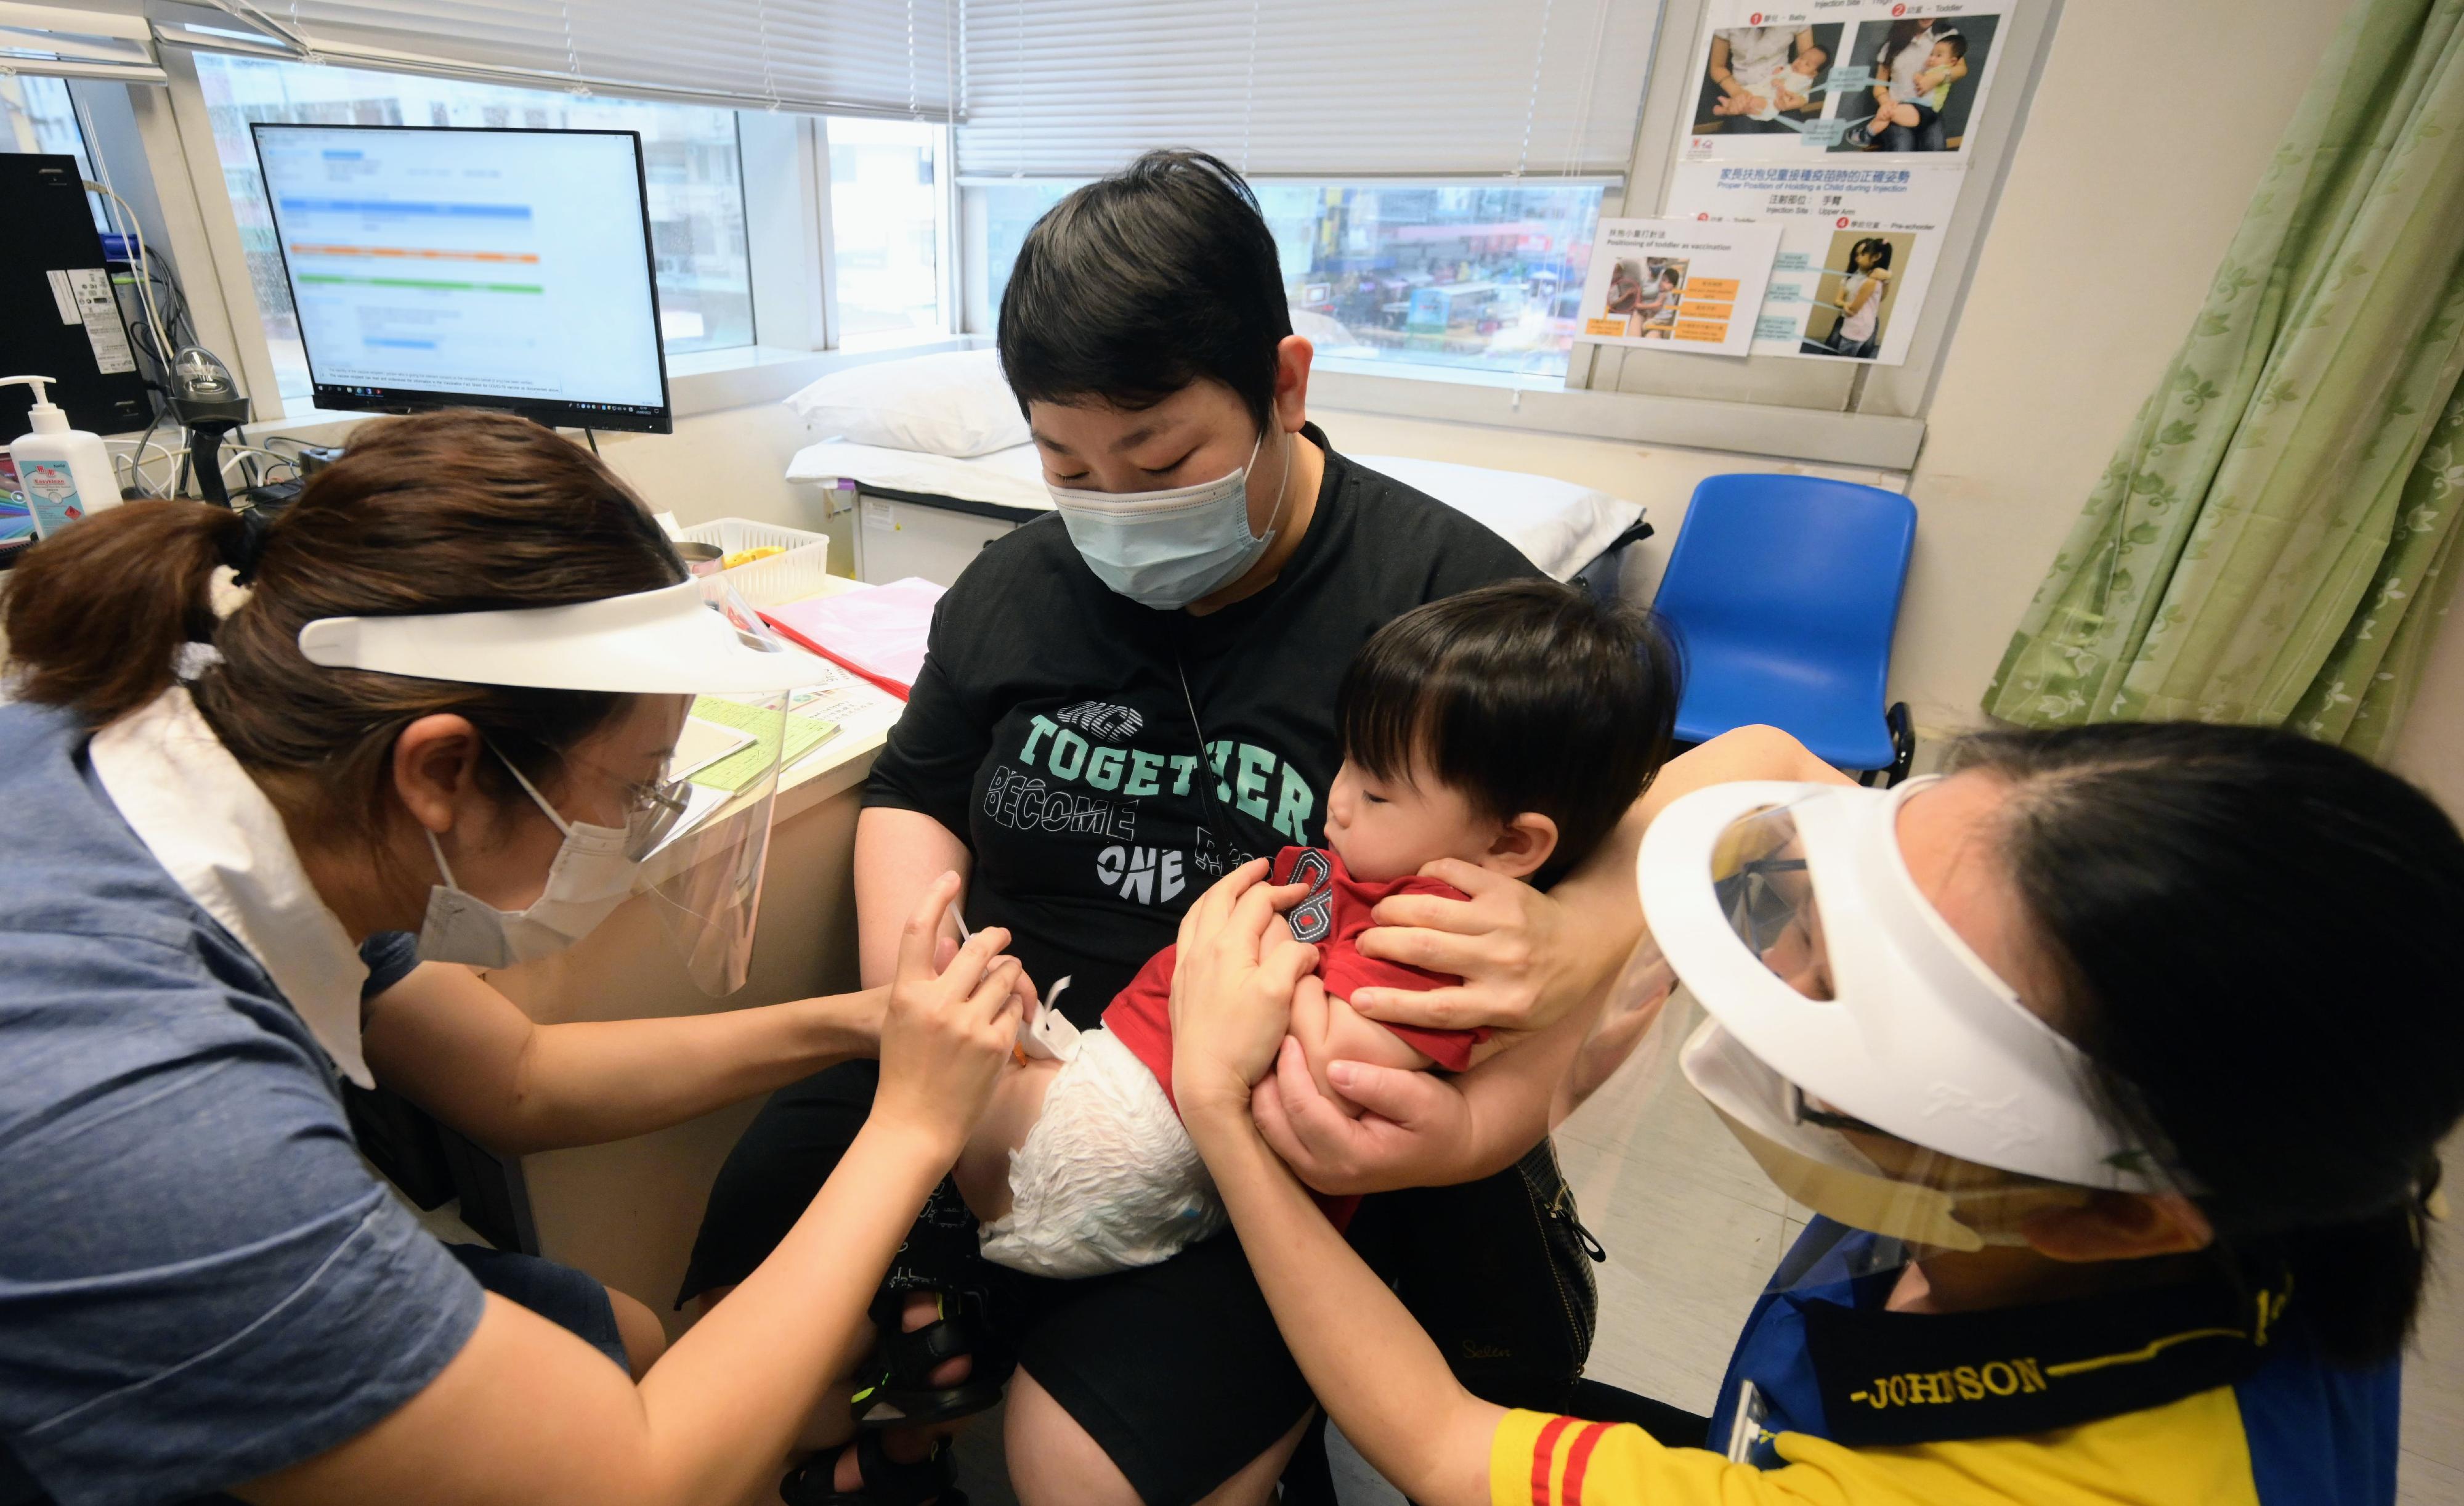 The Secretary for the Civil Service, Mrs Ingrid Yeung, today (August 23) visited West Kowloon Maternal and Child Health Centre to learn about the arrangements of providing a COVID-19 vaccination service for children there. Photo shows a 17-month-old boy receiving his COVID-19 vaccination.

